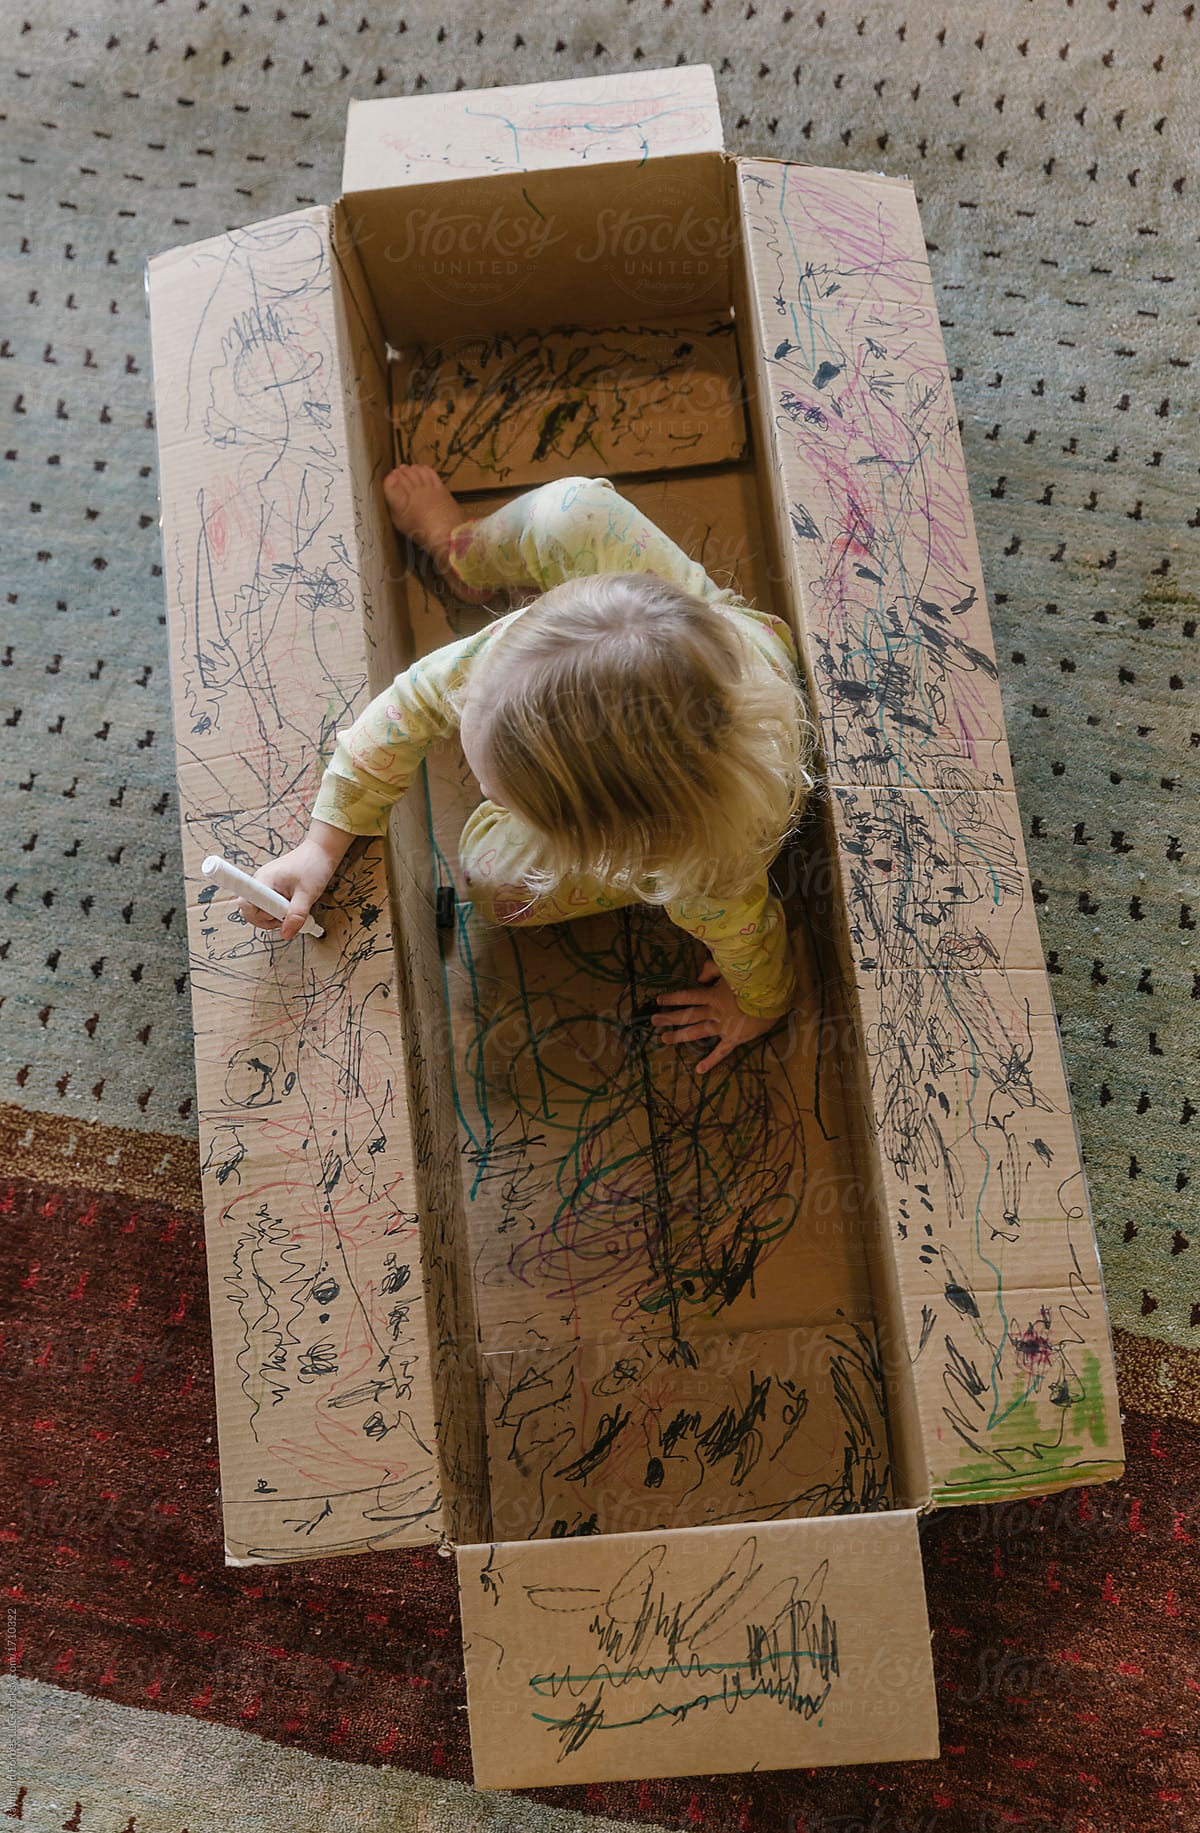 Child Drawing while Playing in Cardboard Box